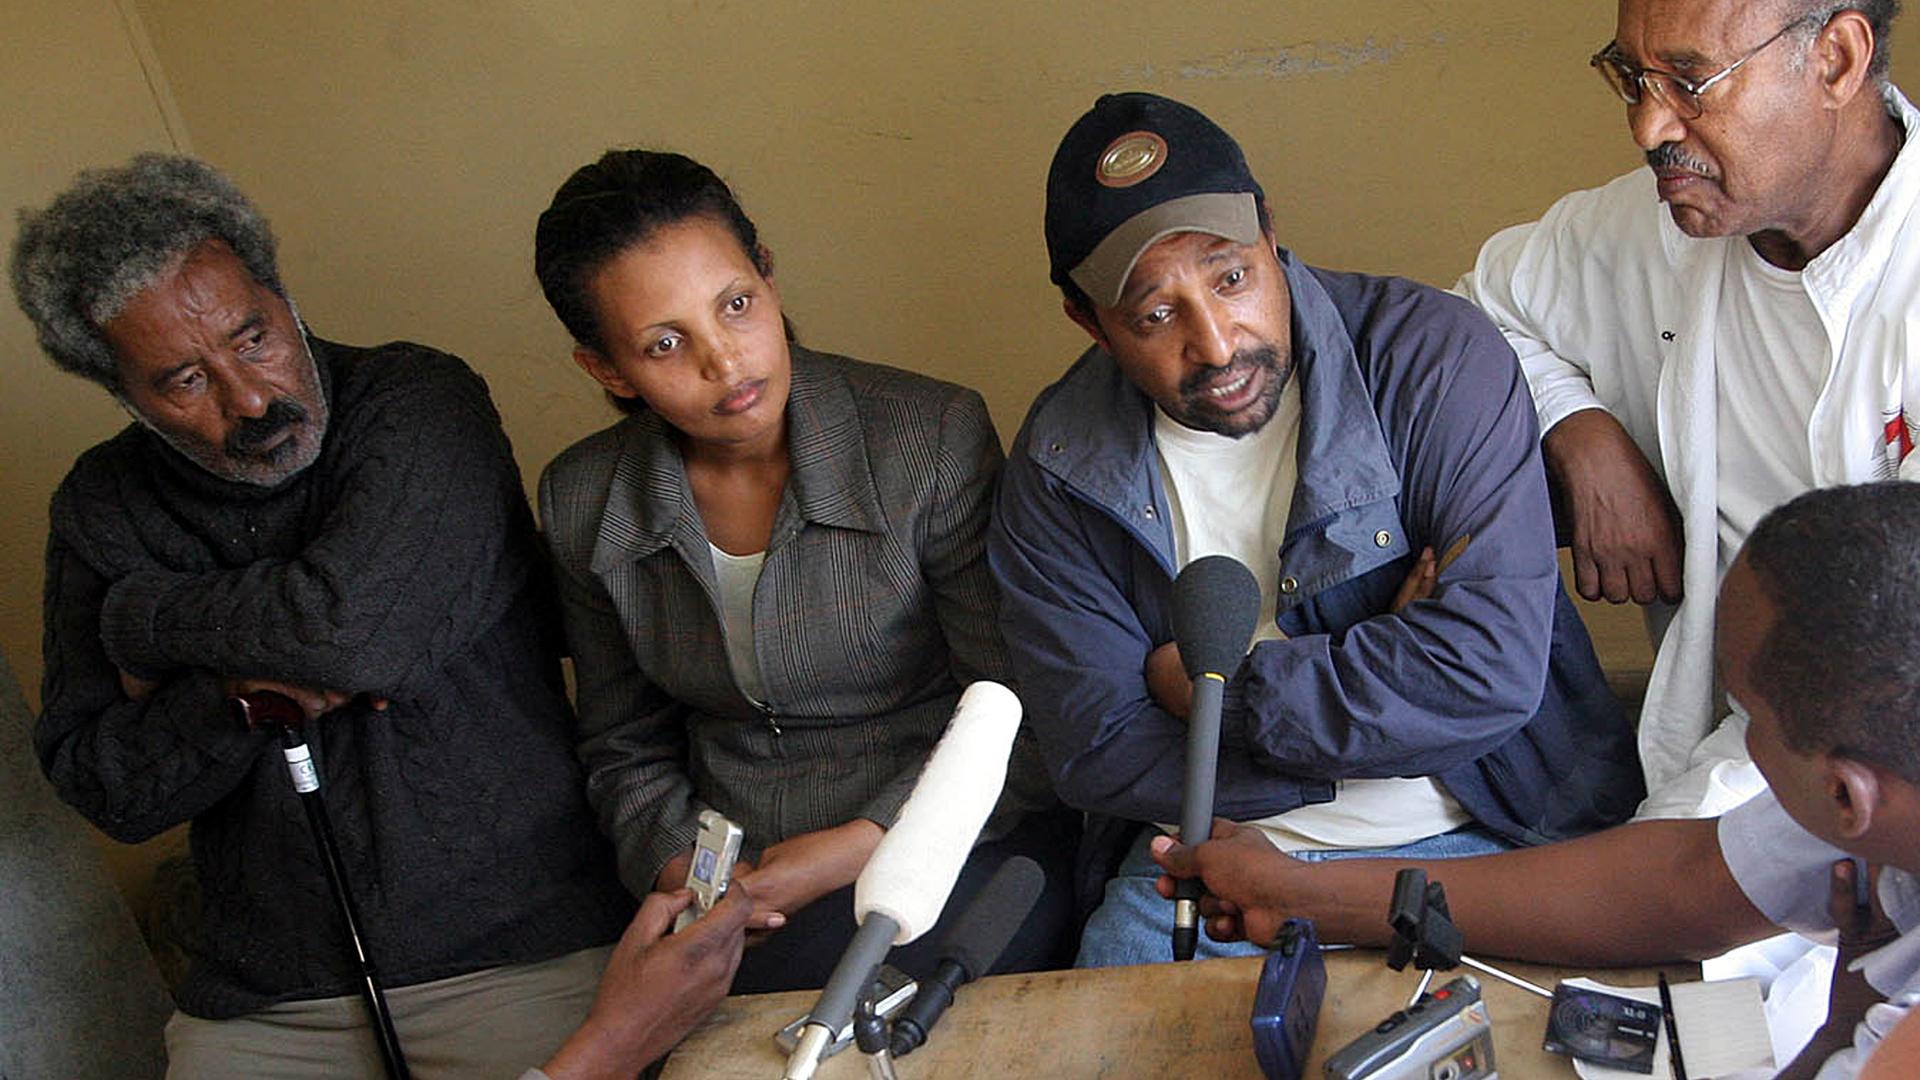 Berhanu Nega (in baseball cap), with other opposition leaders, speaking to reporters in Addis Ababa in 2005 after elections won by his party were annulled by the regime. 